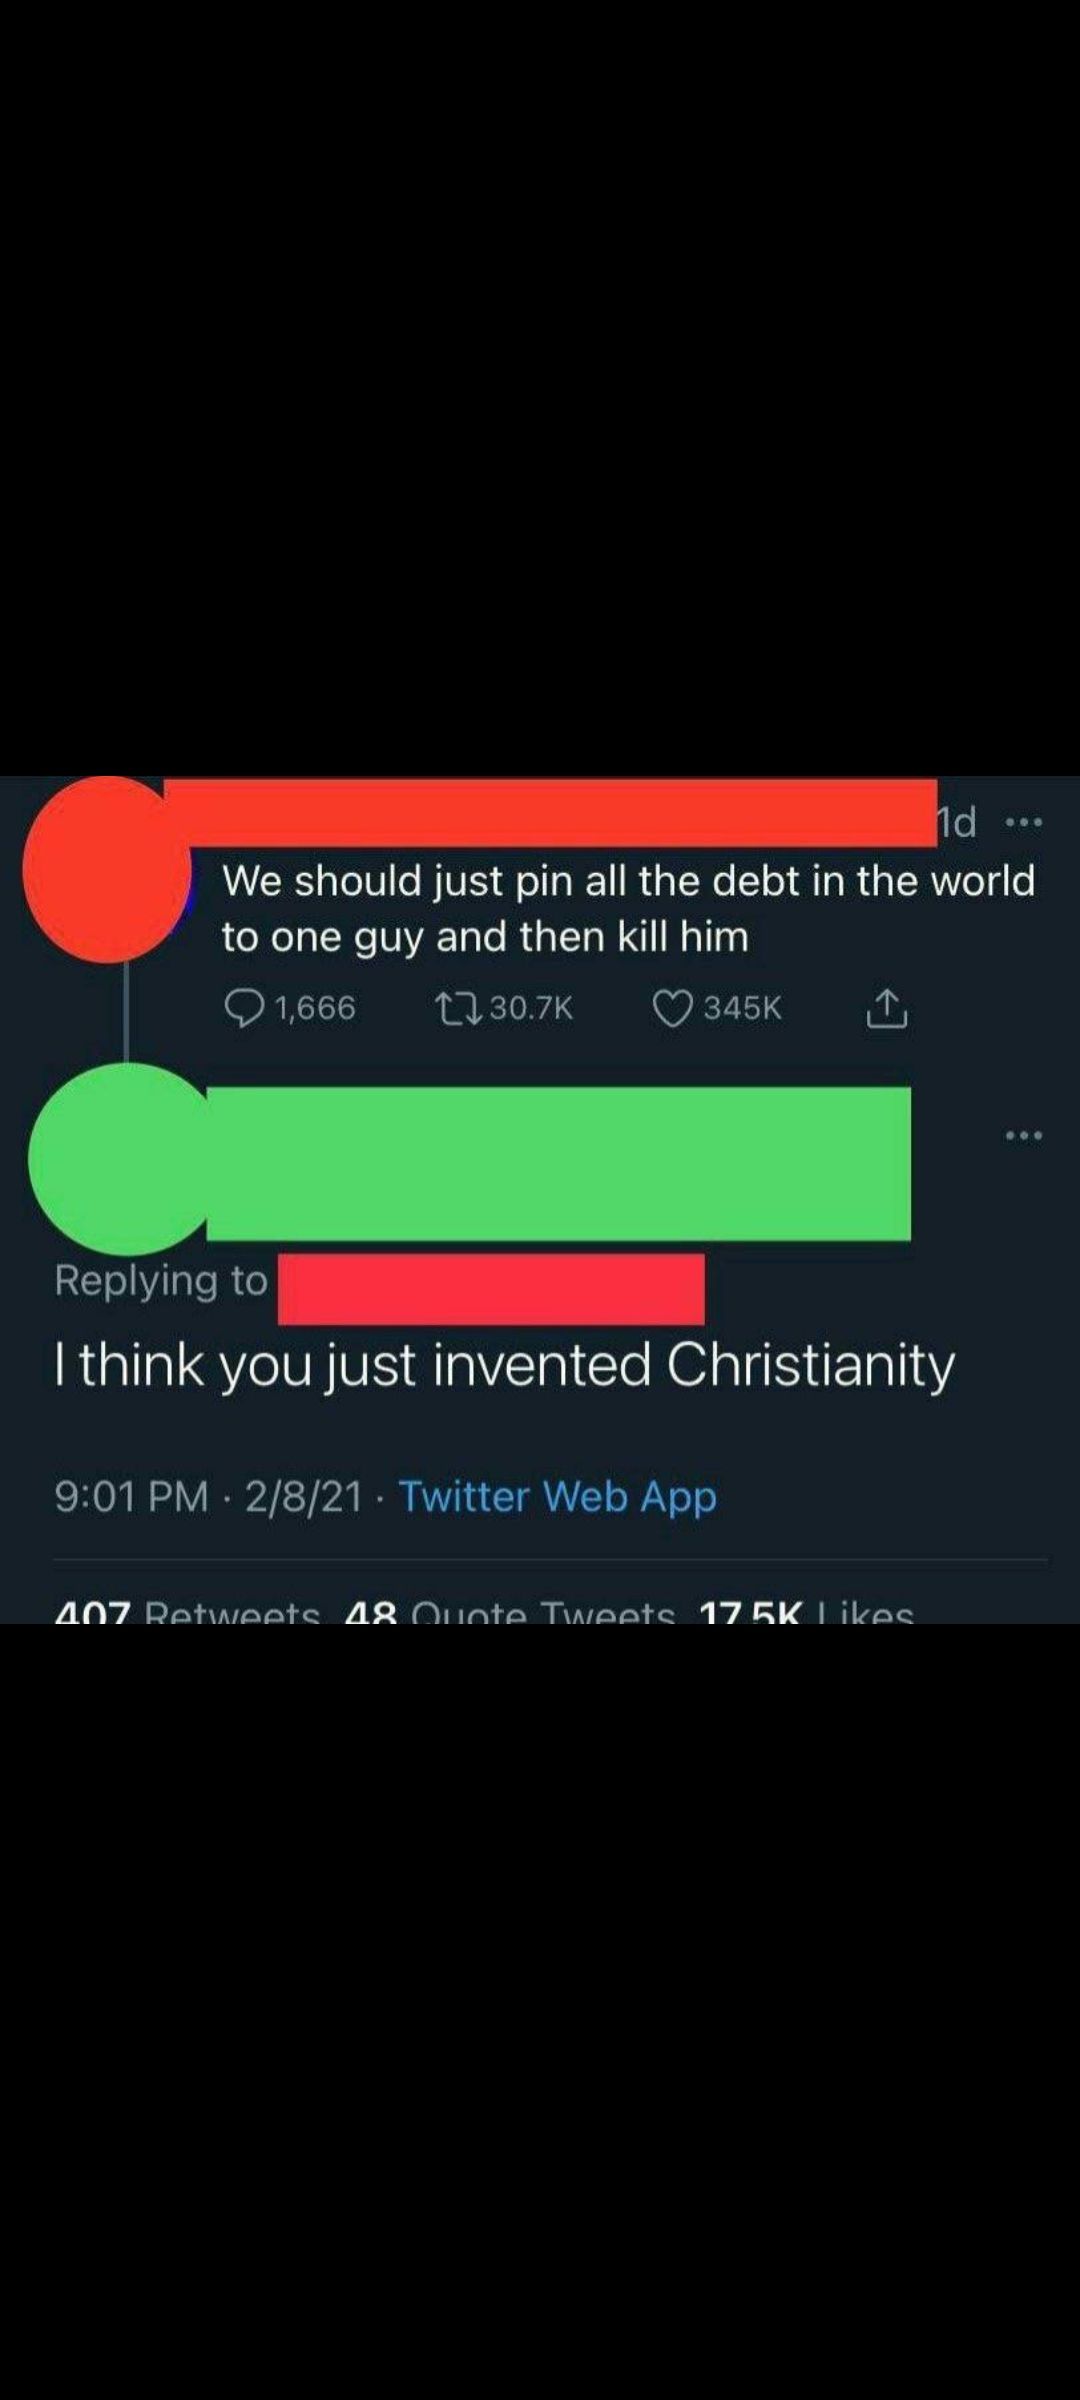 The invention of Christianity